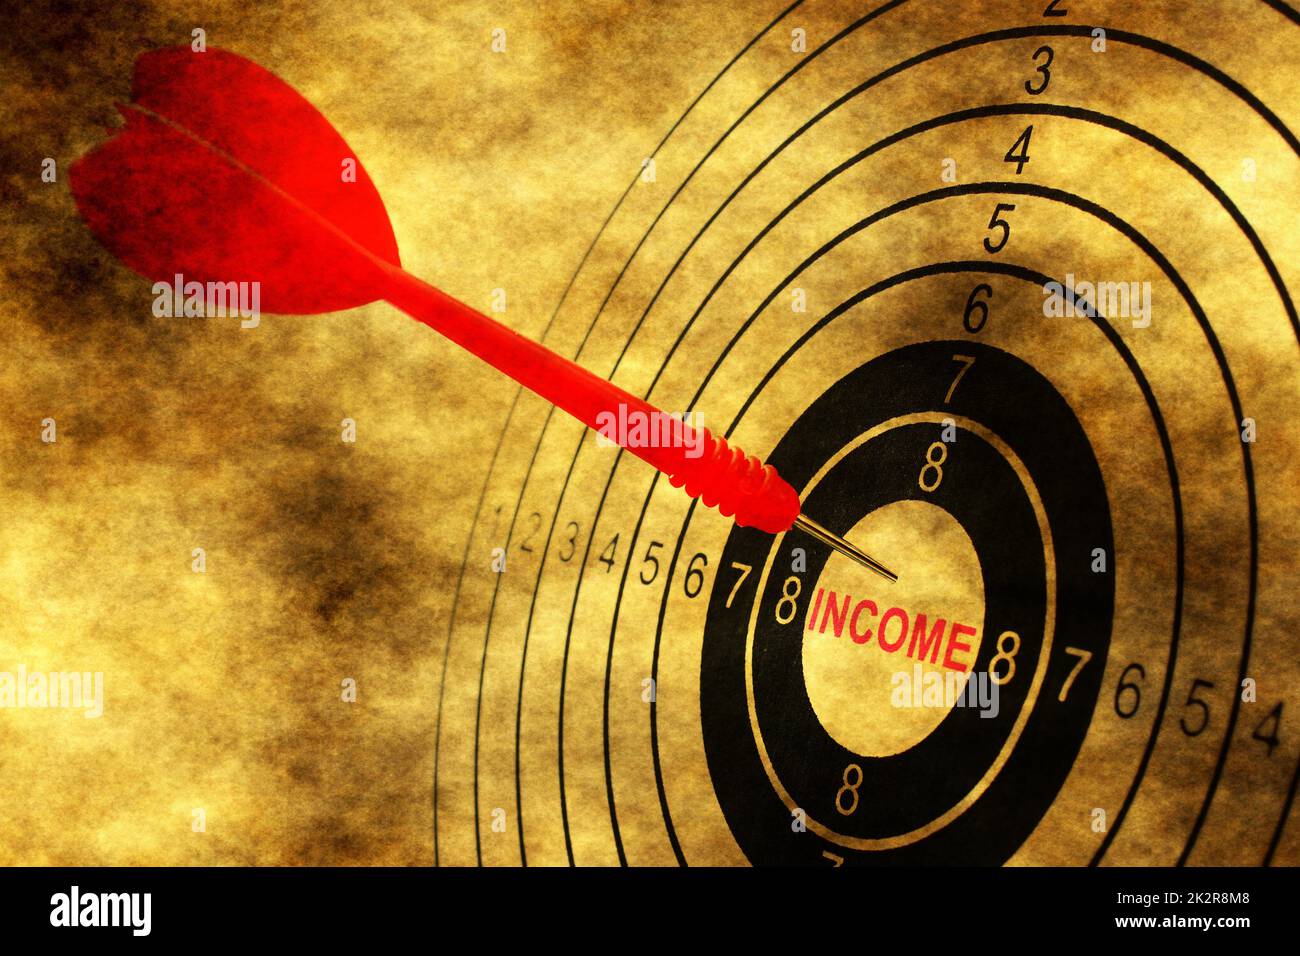 Income target on grunge background Stock Photo